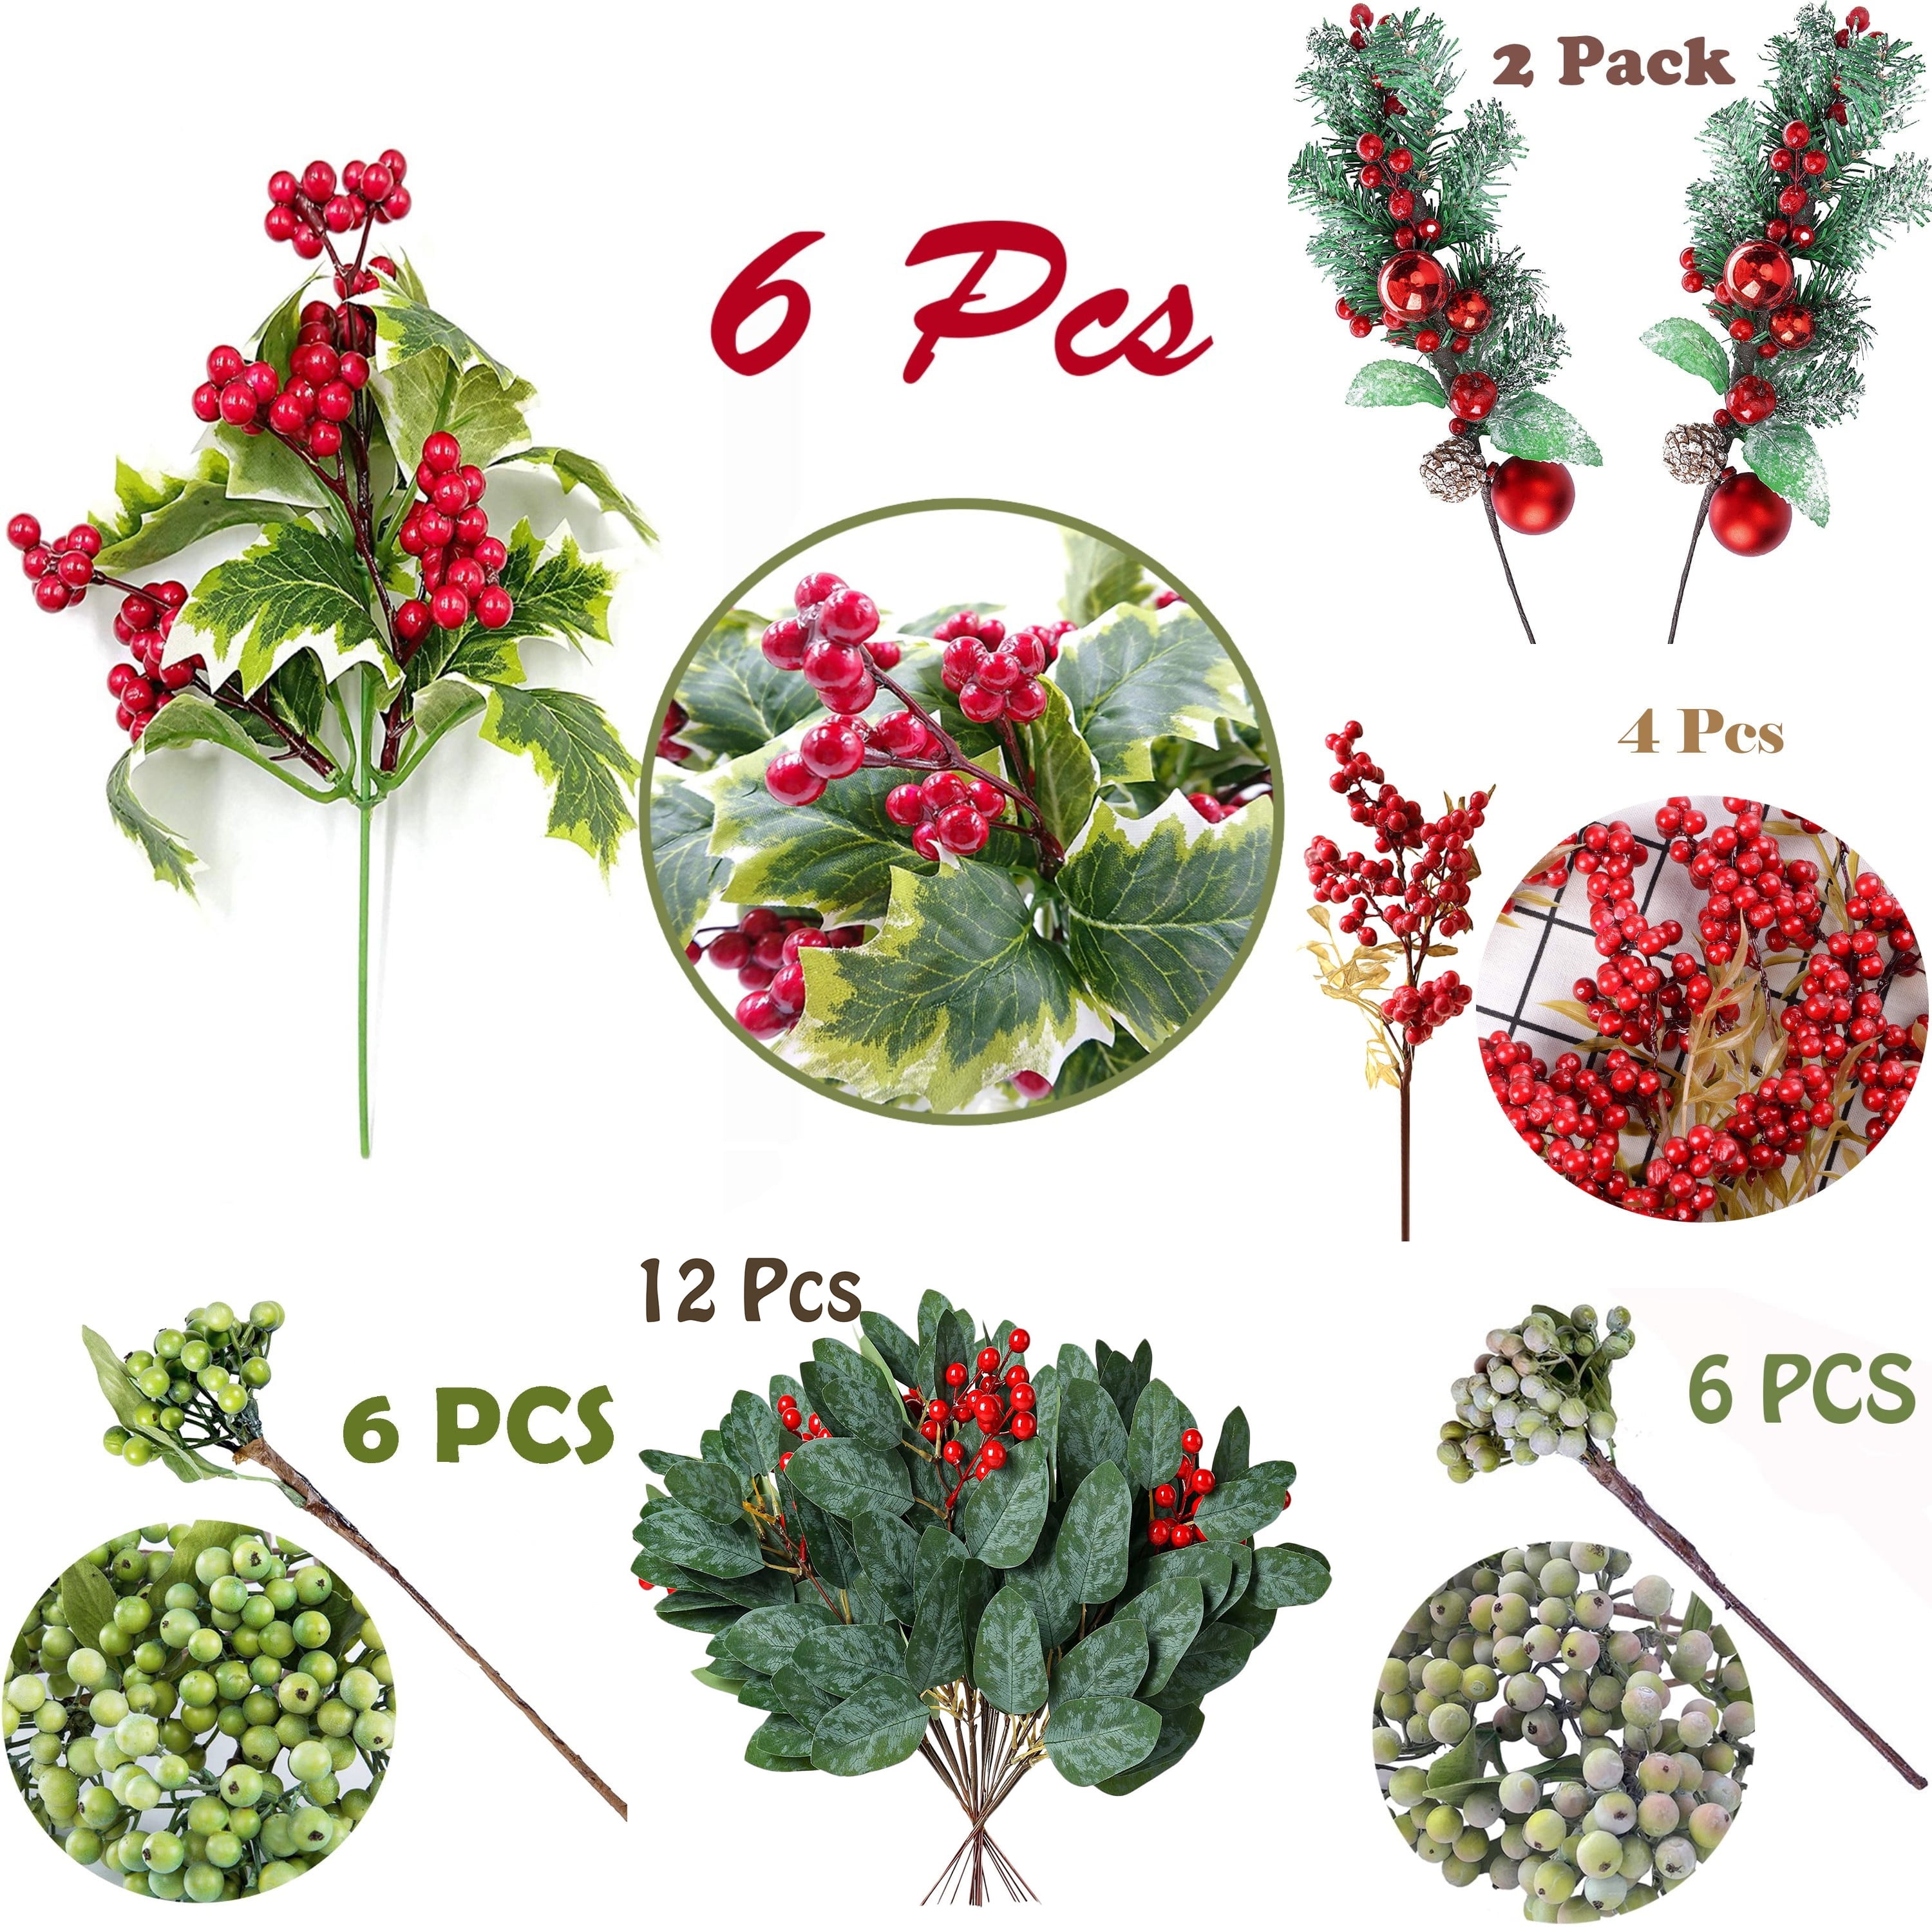 5-50Pcs Artificial Holly Berry Green Leaves Christmas Ornaments